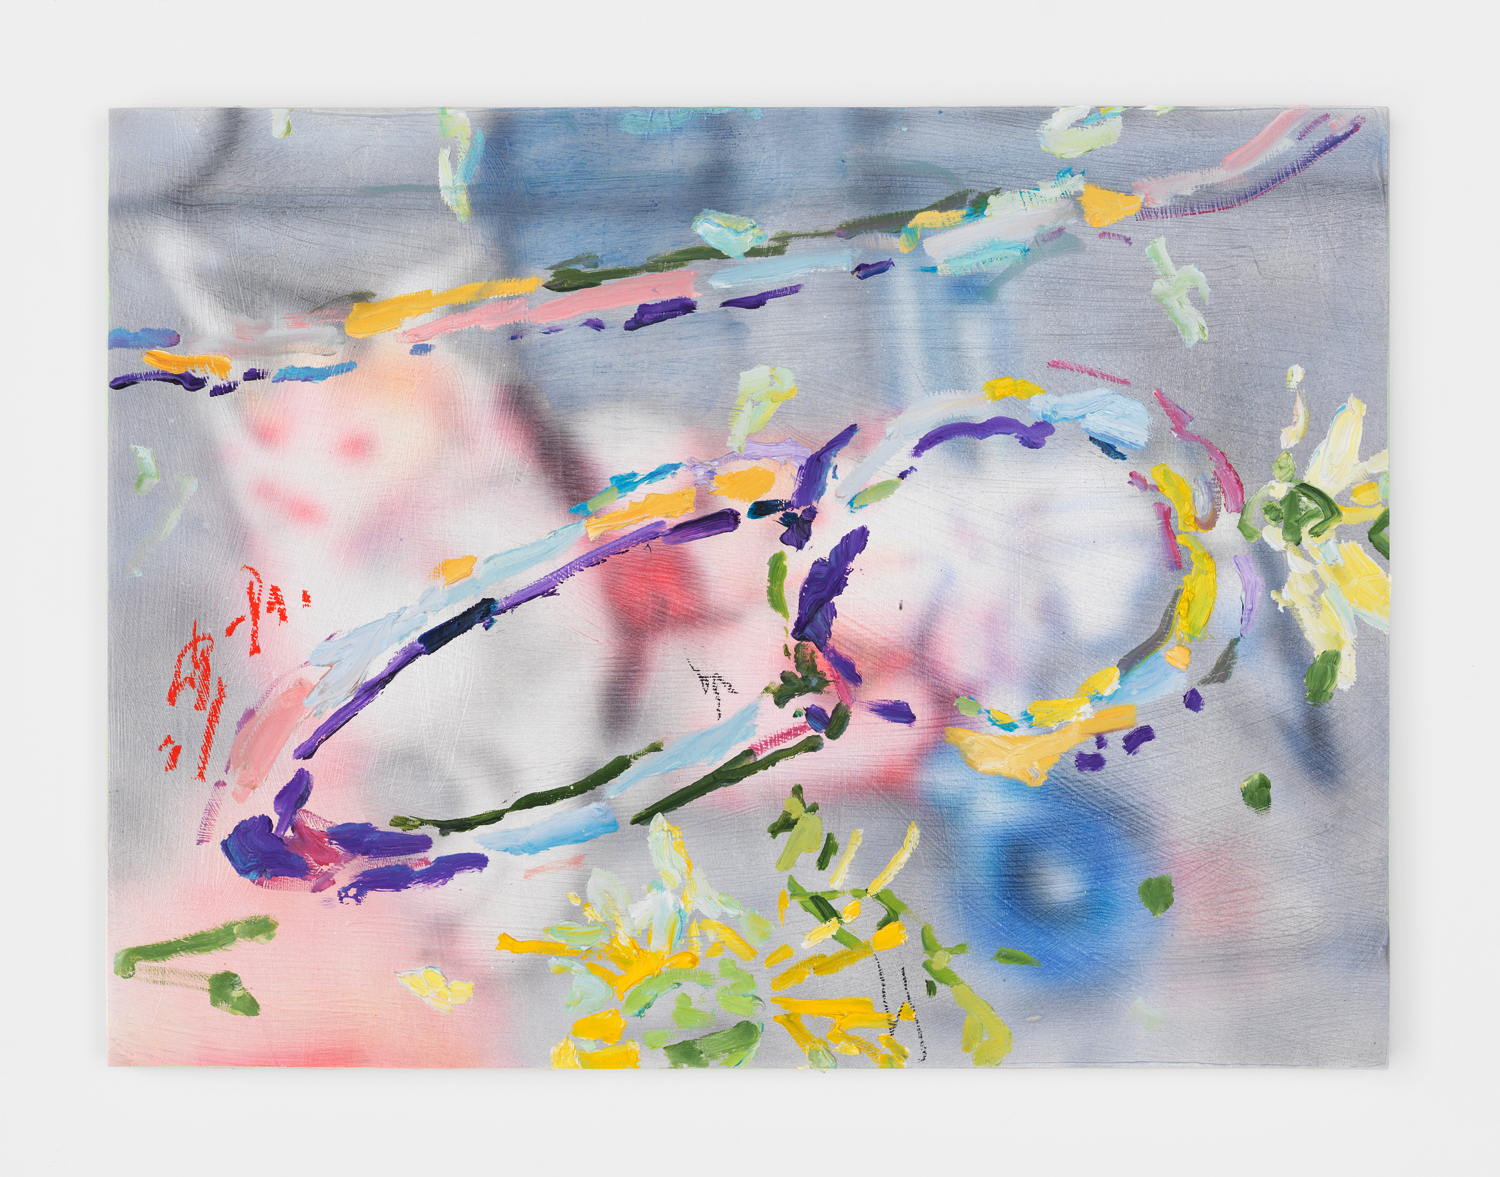 Rachel Rossin, Pulled Tendon, RJ, 2021, Oil, oil stick, and airbrushed acrylic on panel, 18h x 24w in.